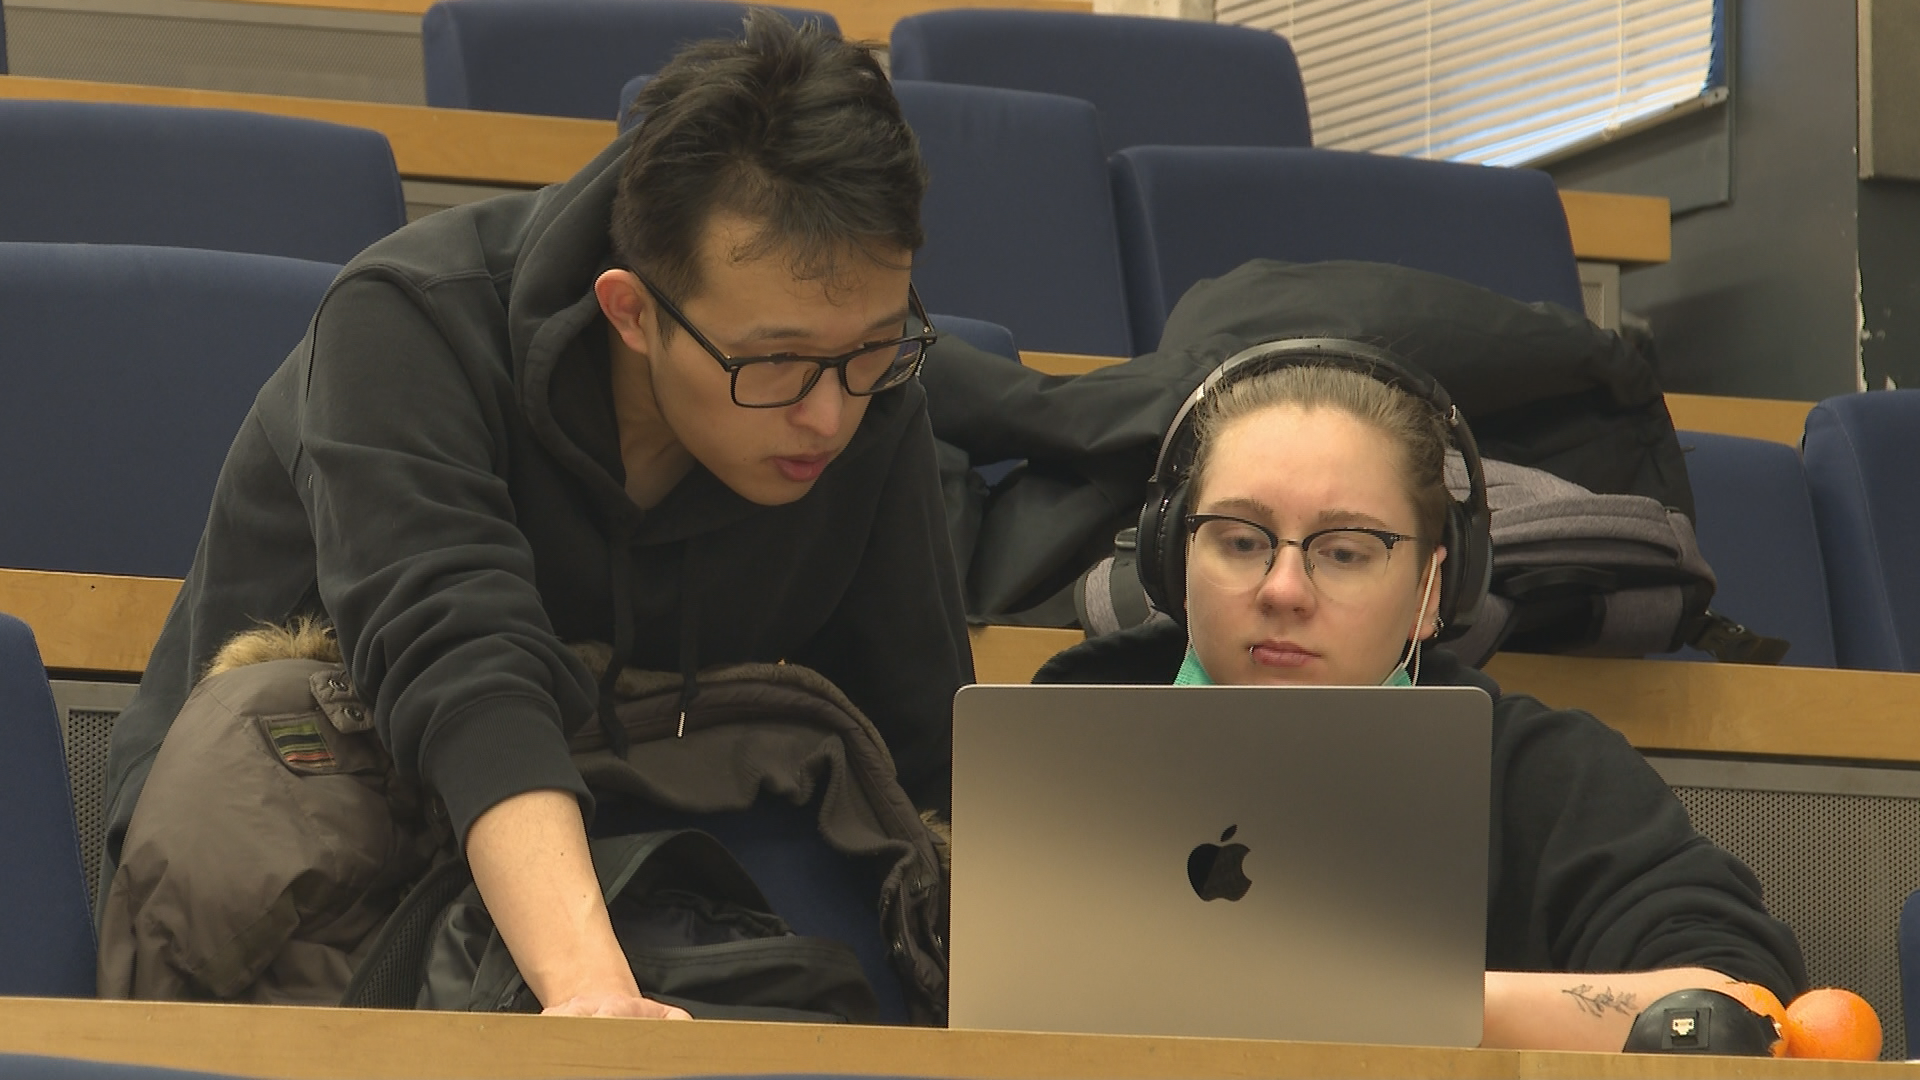 Global Game Jam challenges students in Halifax to design video game in 48 hours